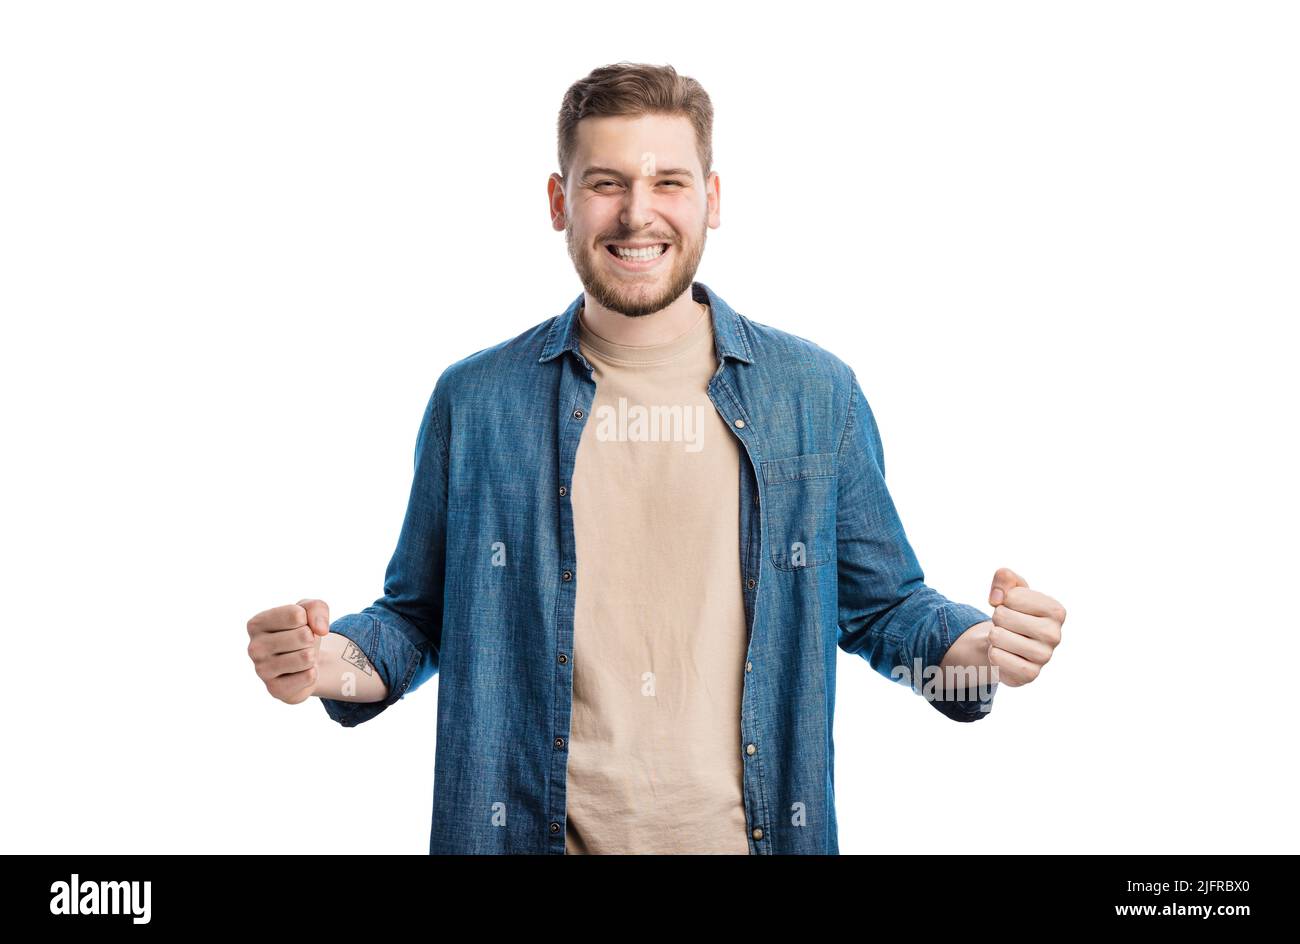 Man standing in victory position Stock Photo